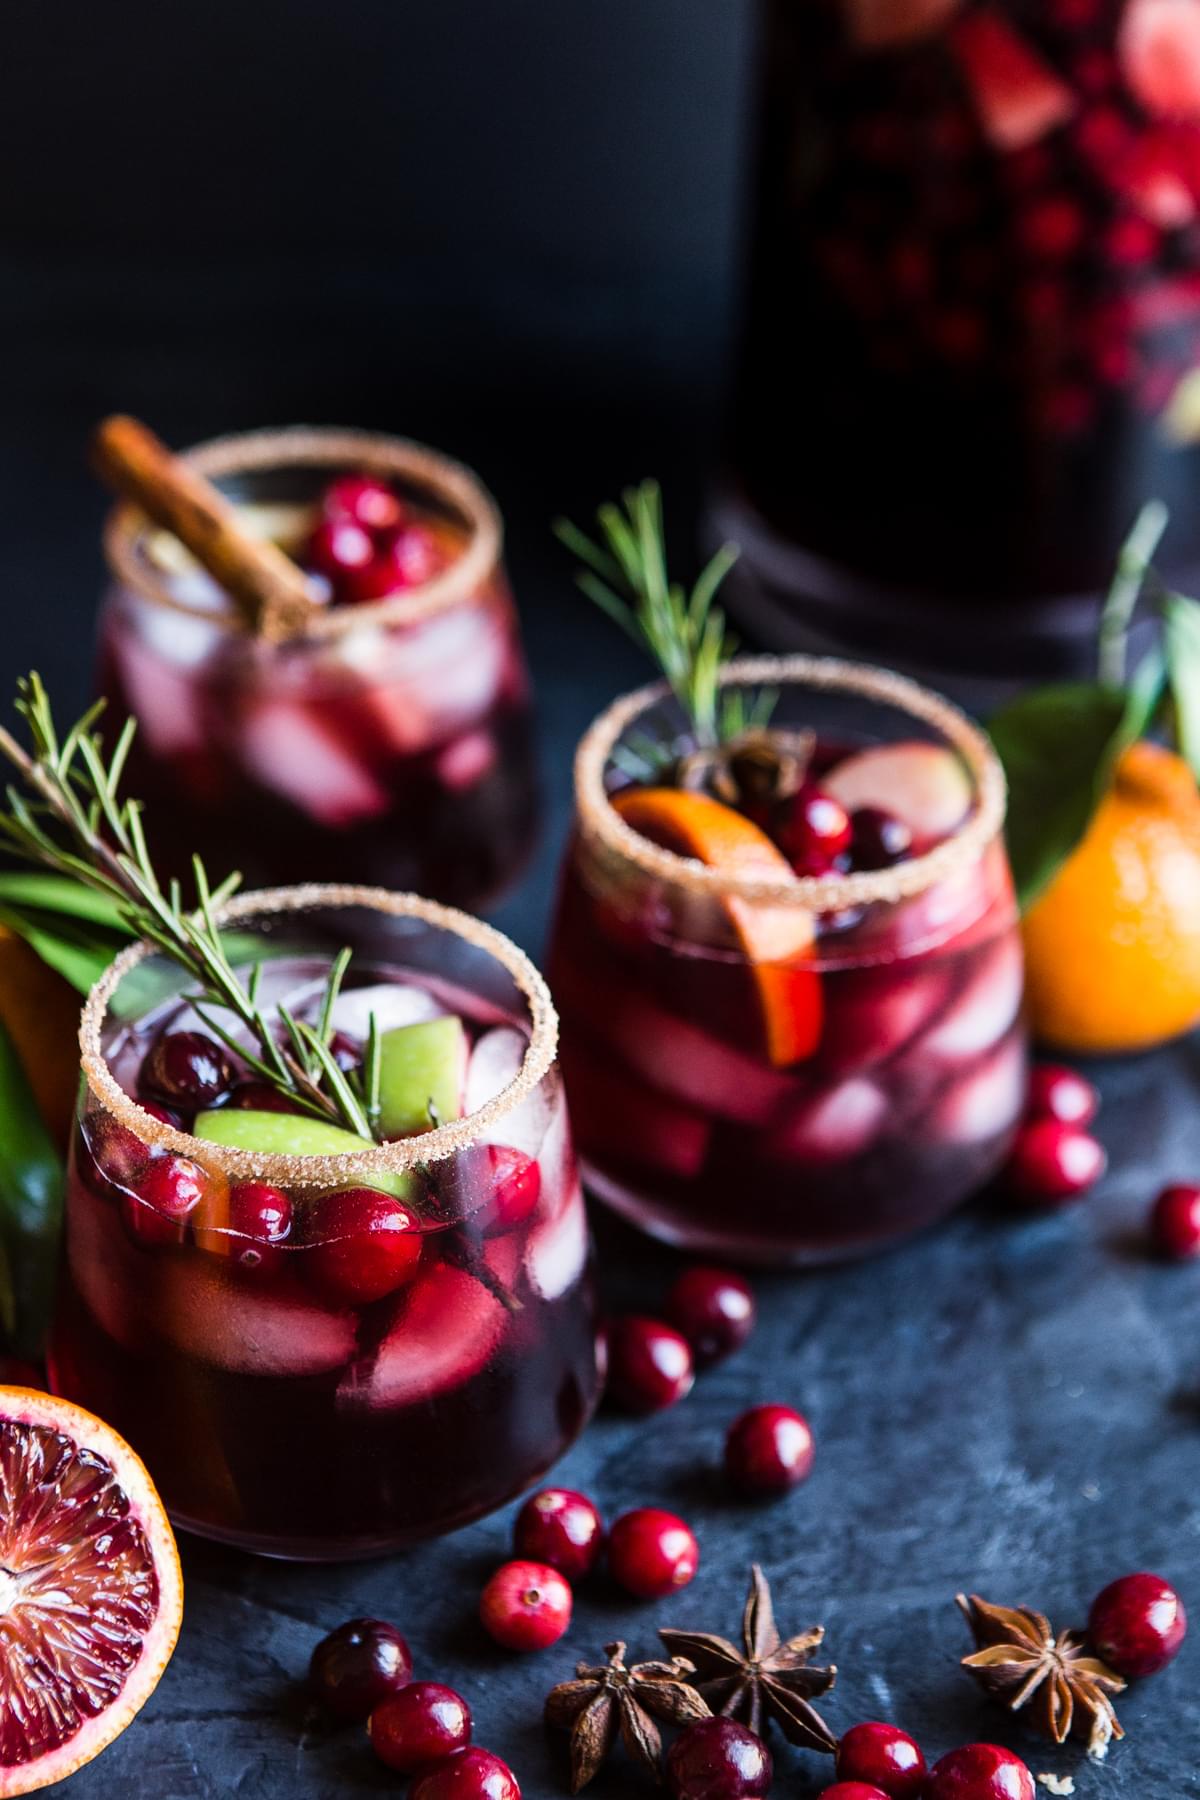 3 glasses filled with red wine sangria made with cranberries, apples, oranges, cinnamon and brandy garnished with rosemary